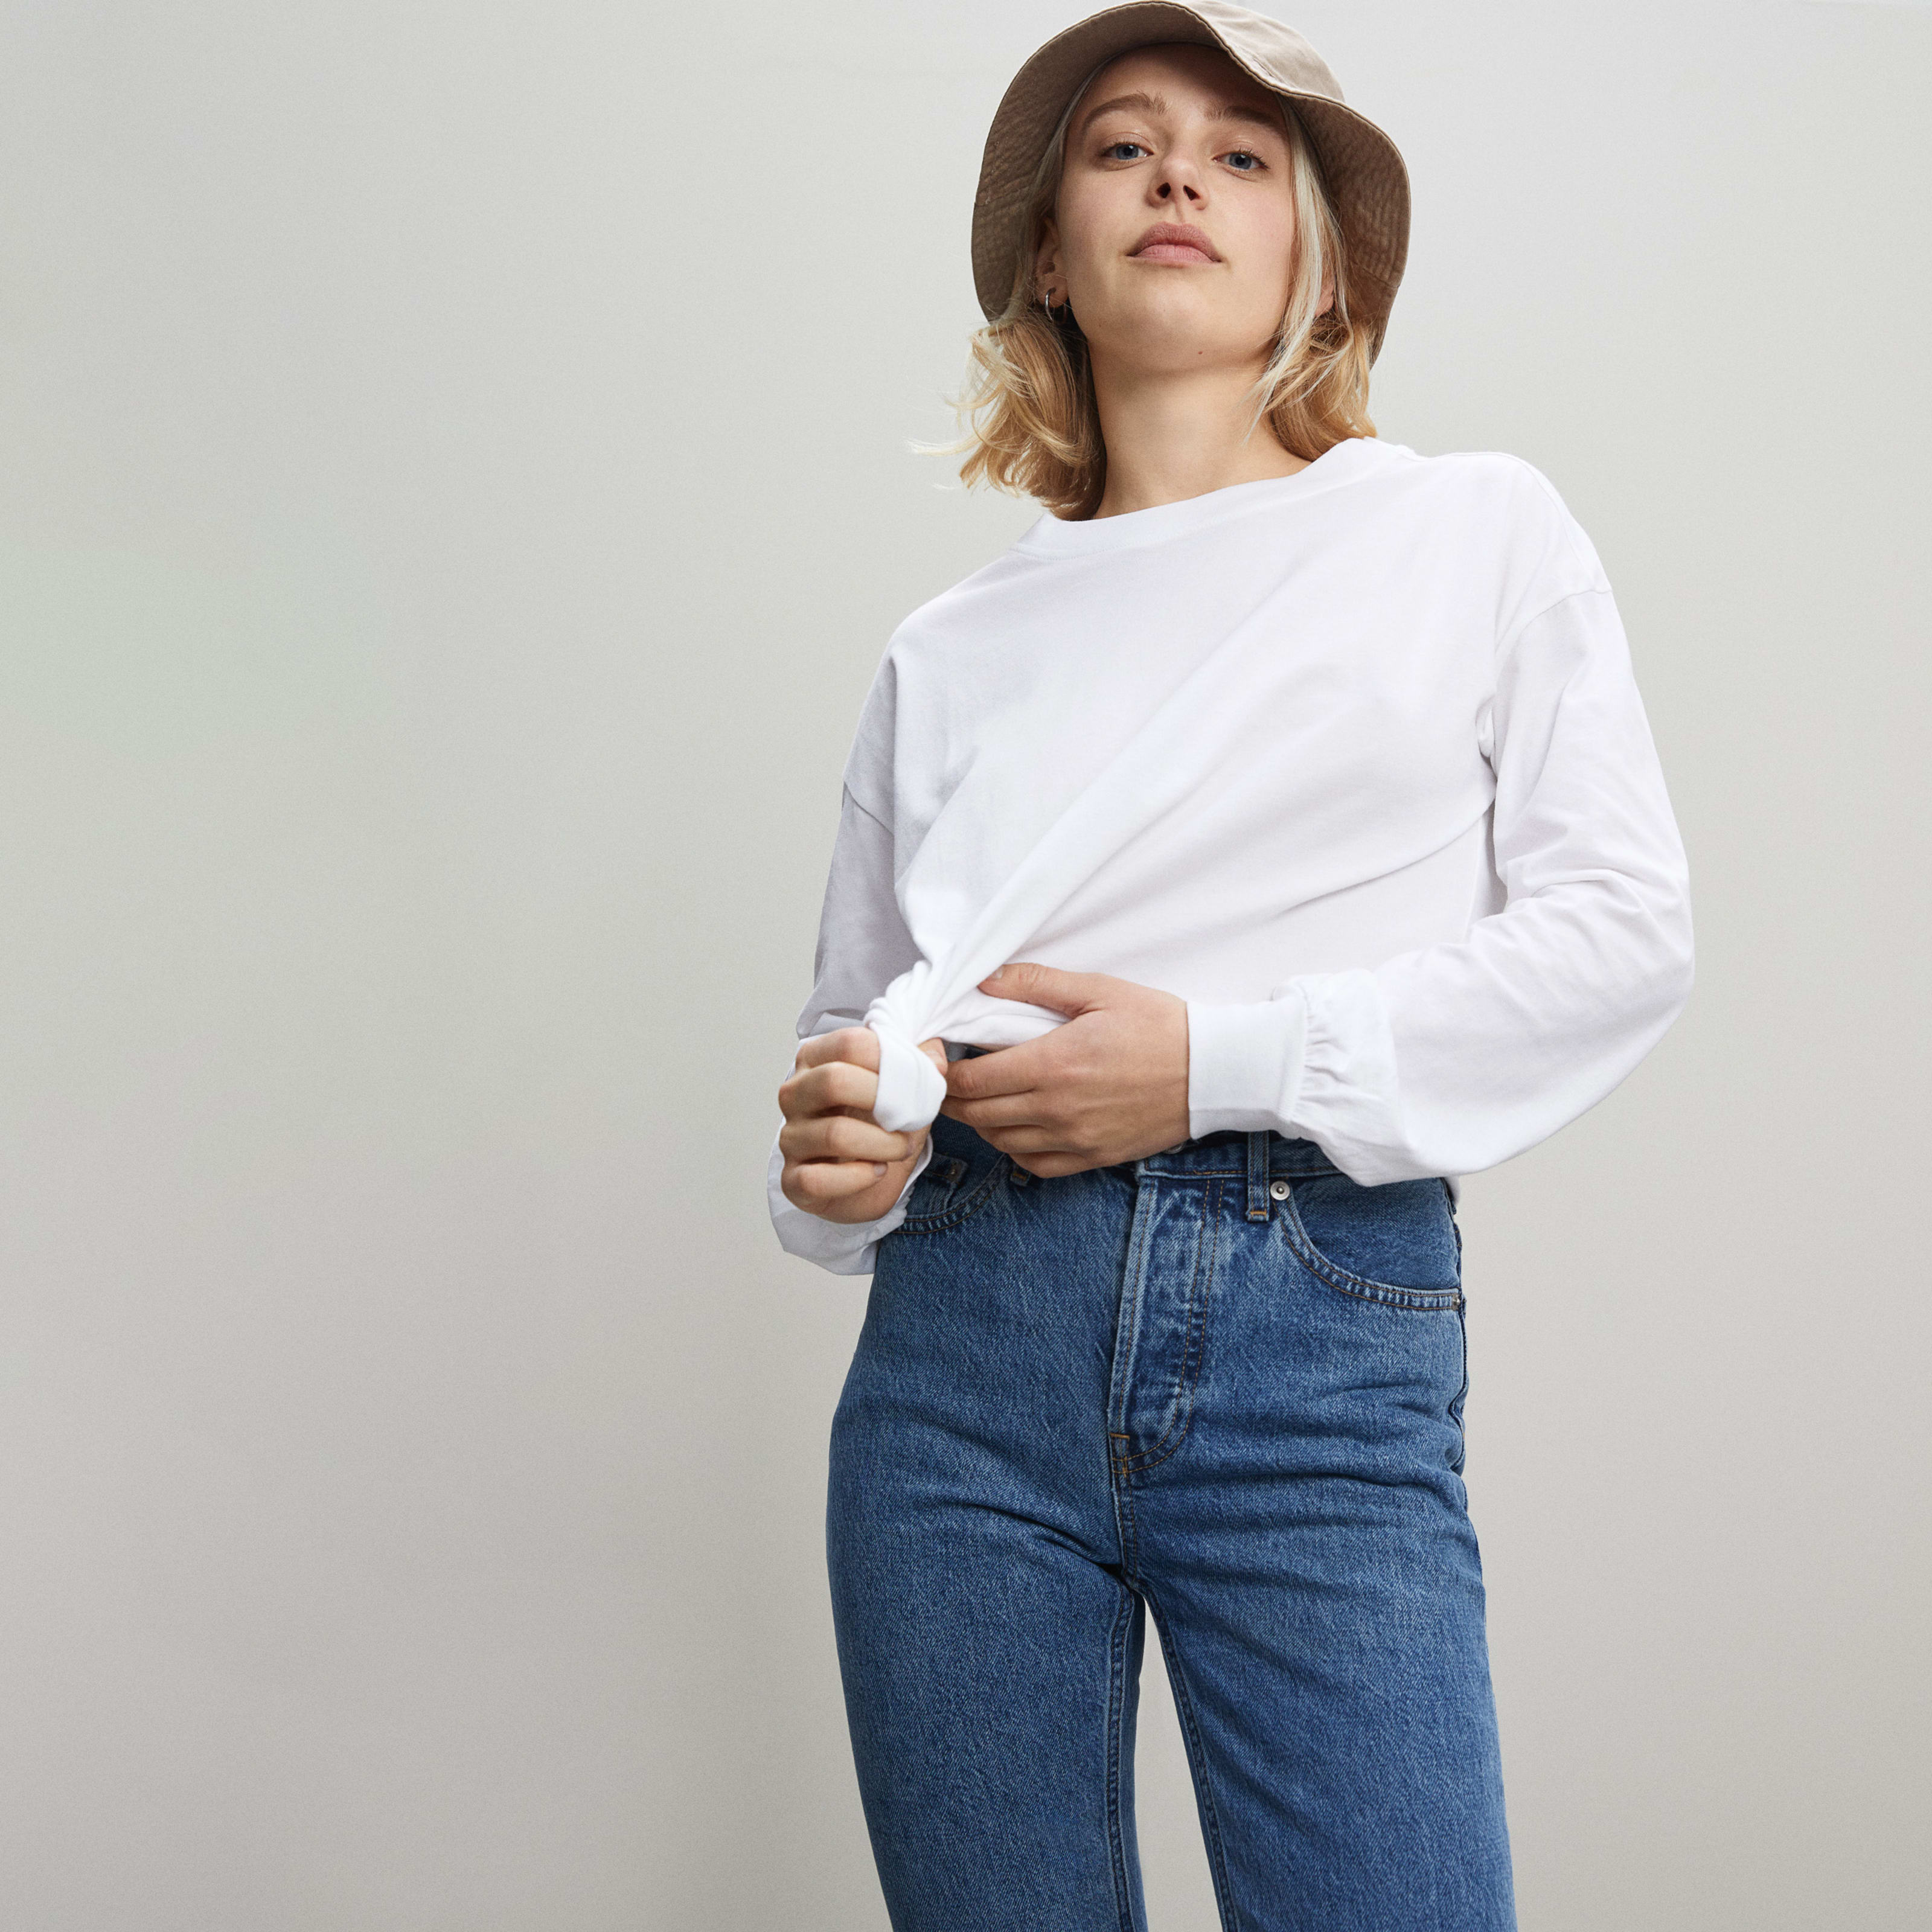 women's organic cotton long-sleeve t-shirt by everlane in white, size s